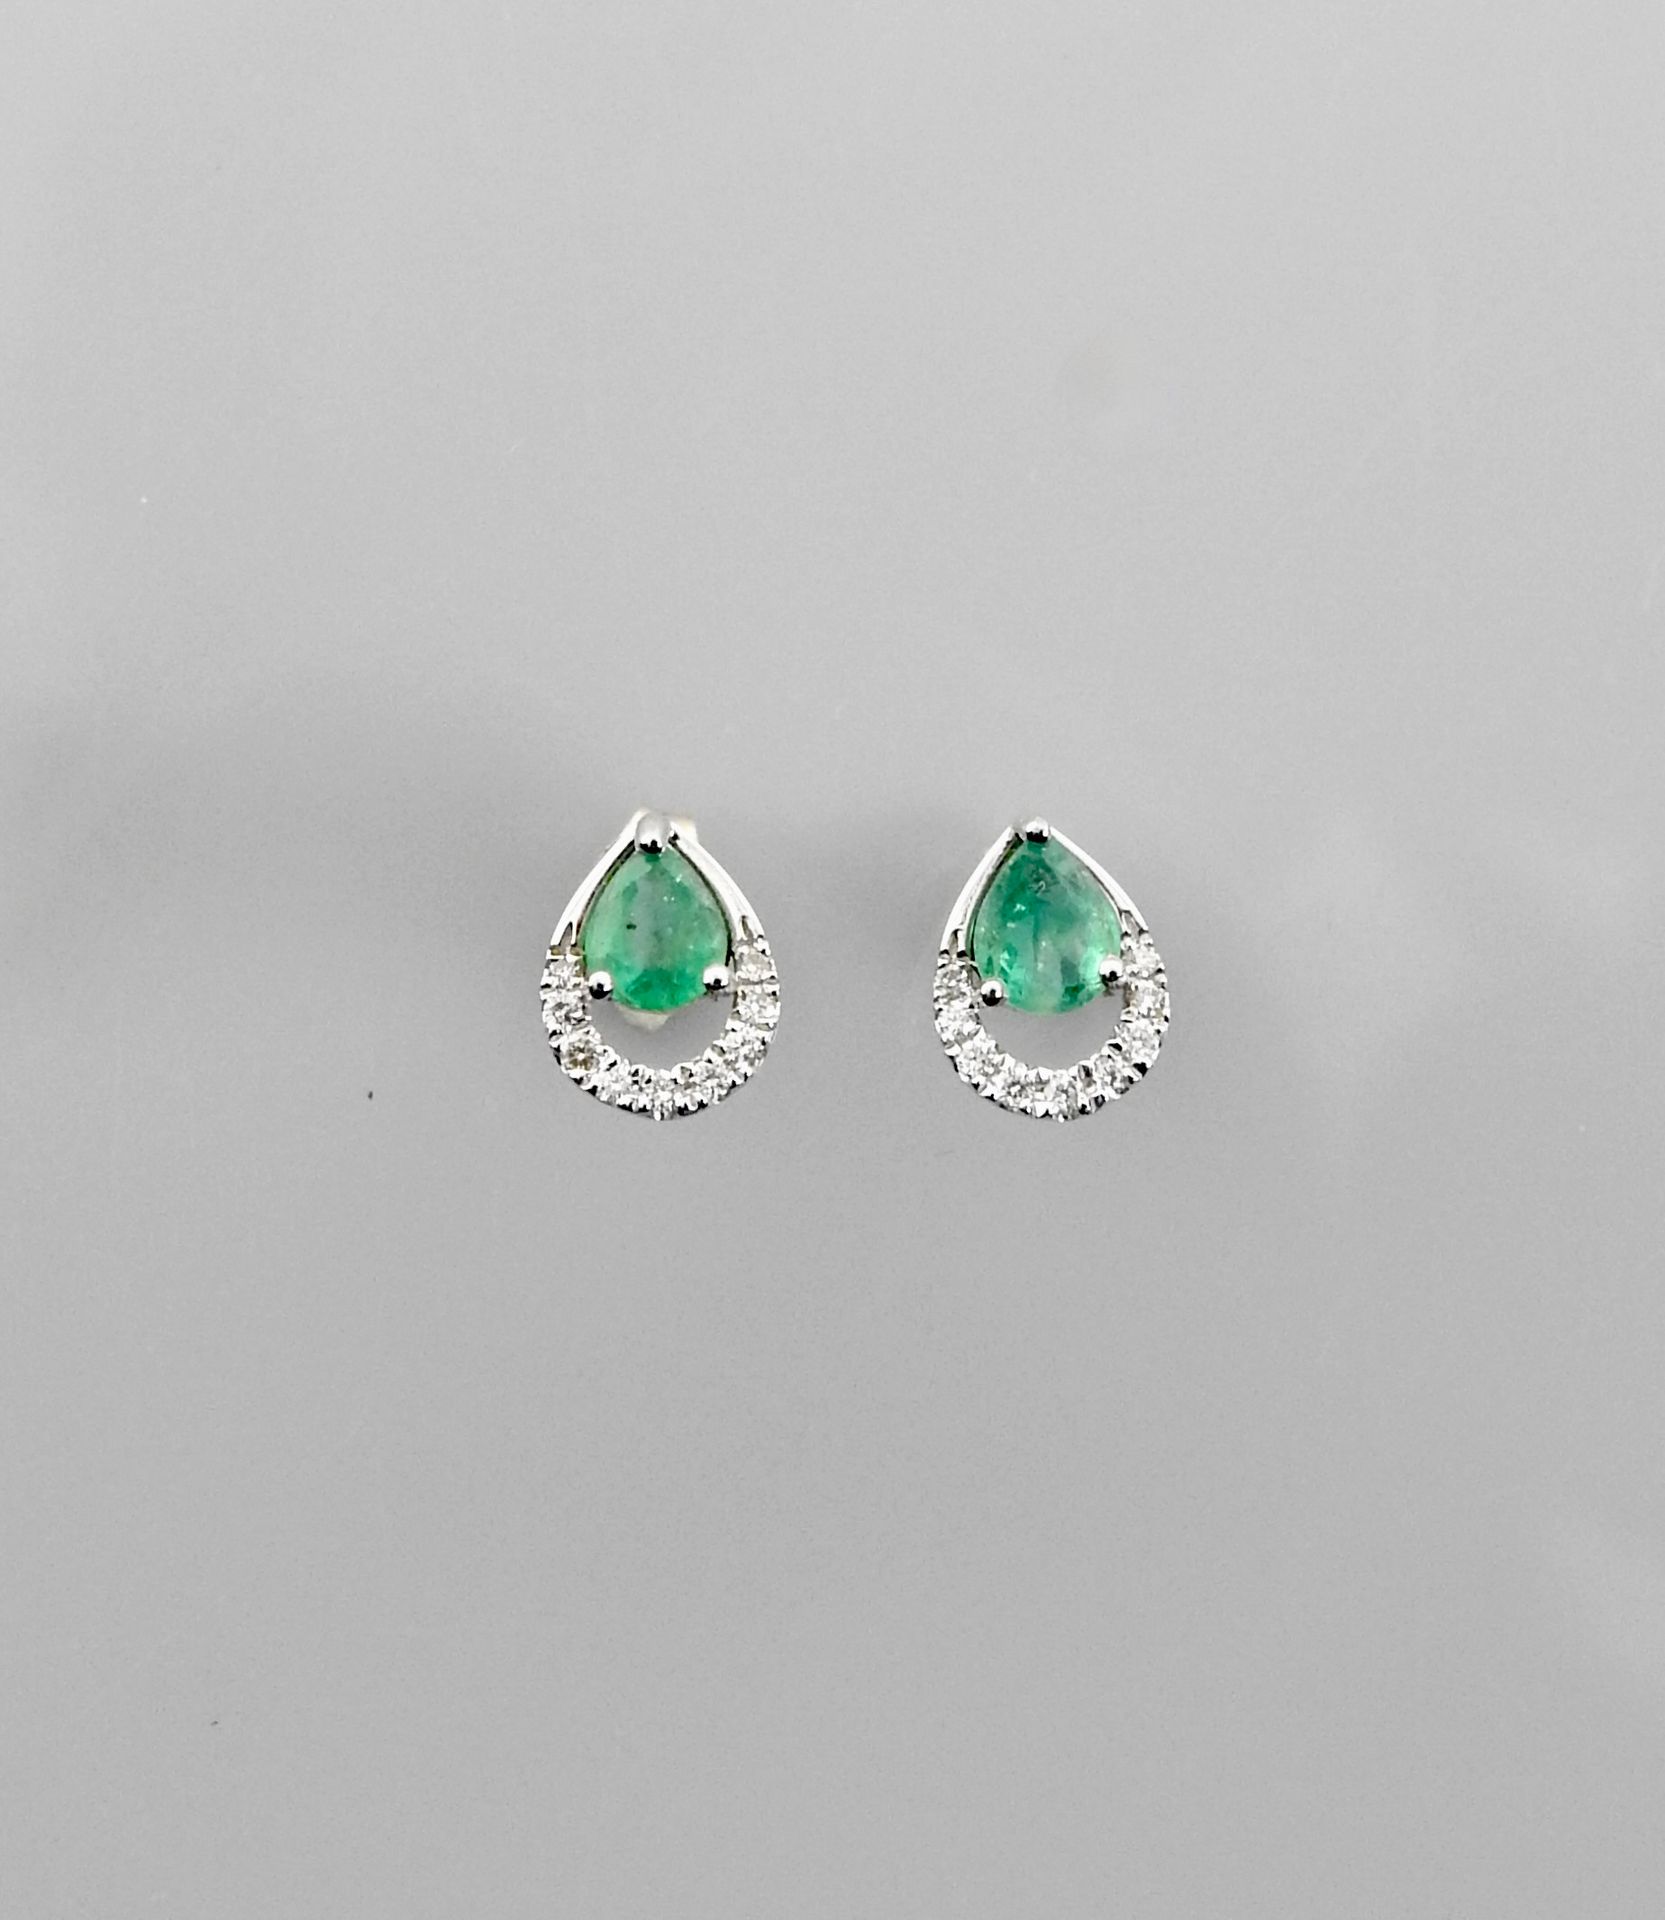 Null Earrings in white gold, 750 MM, each set with a pear-cut emerald, edged wit&hellip;